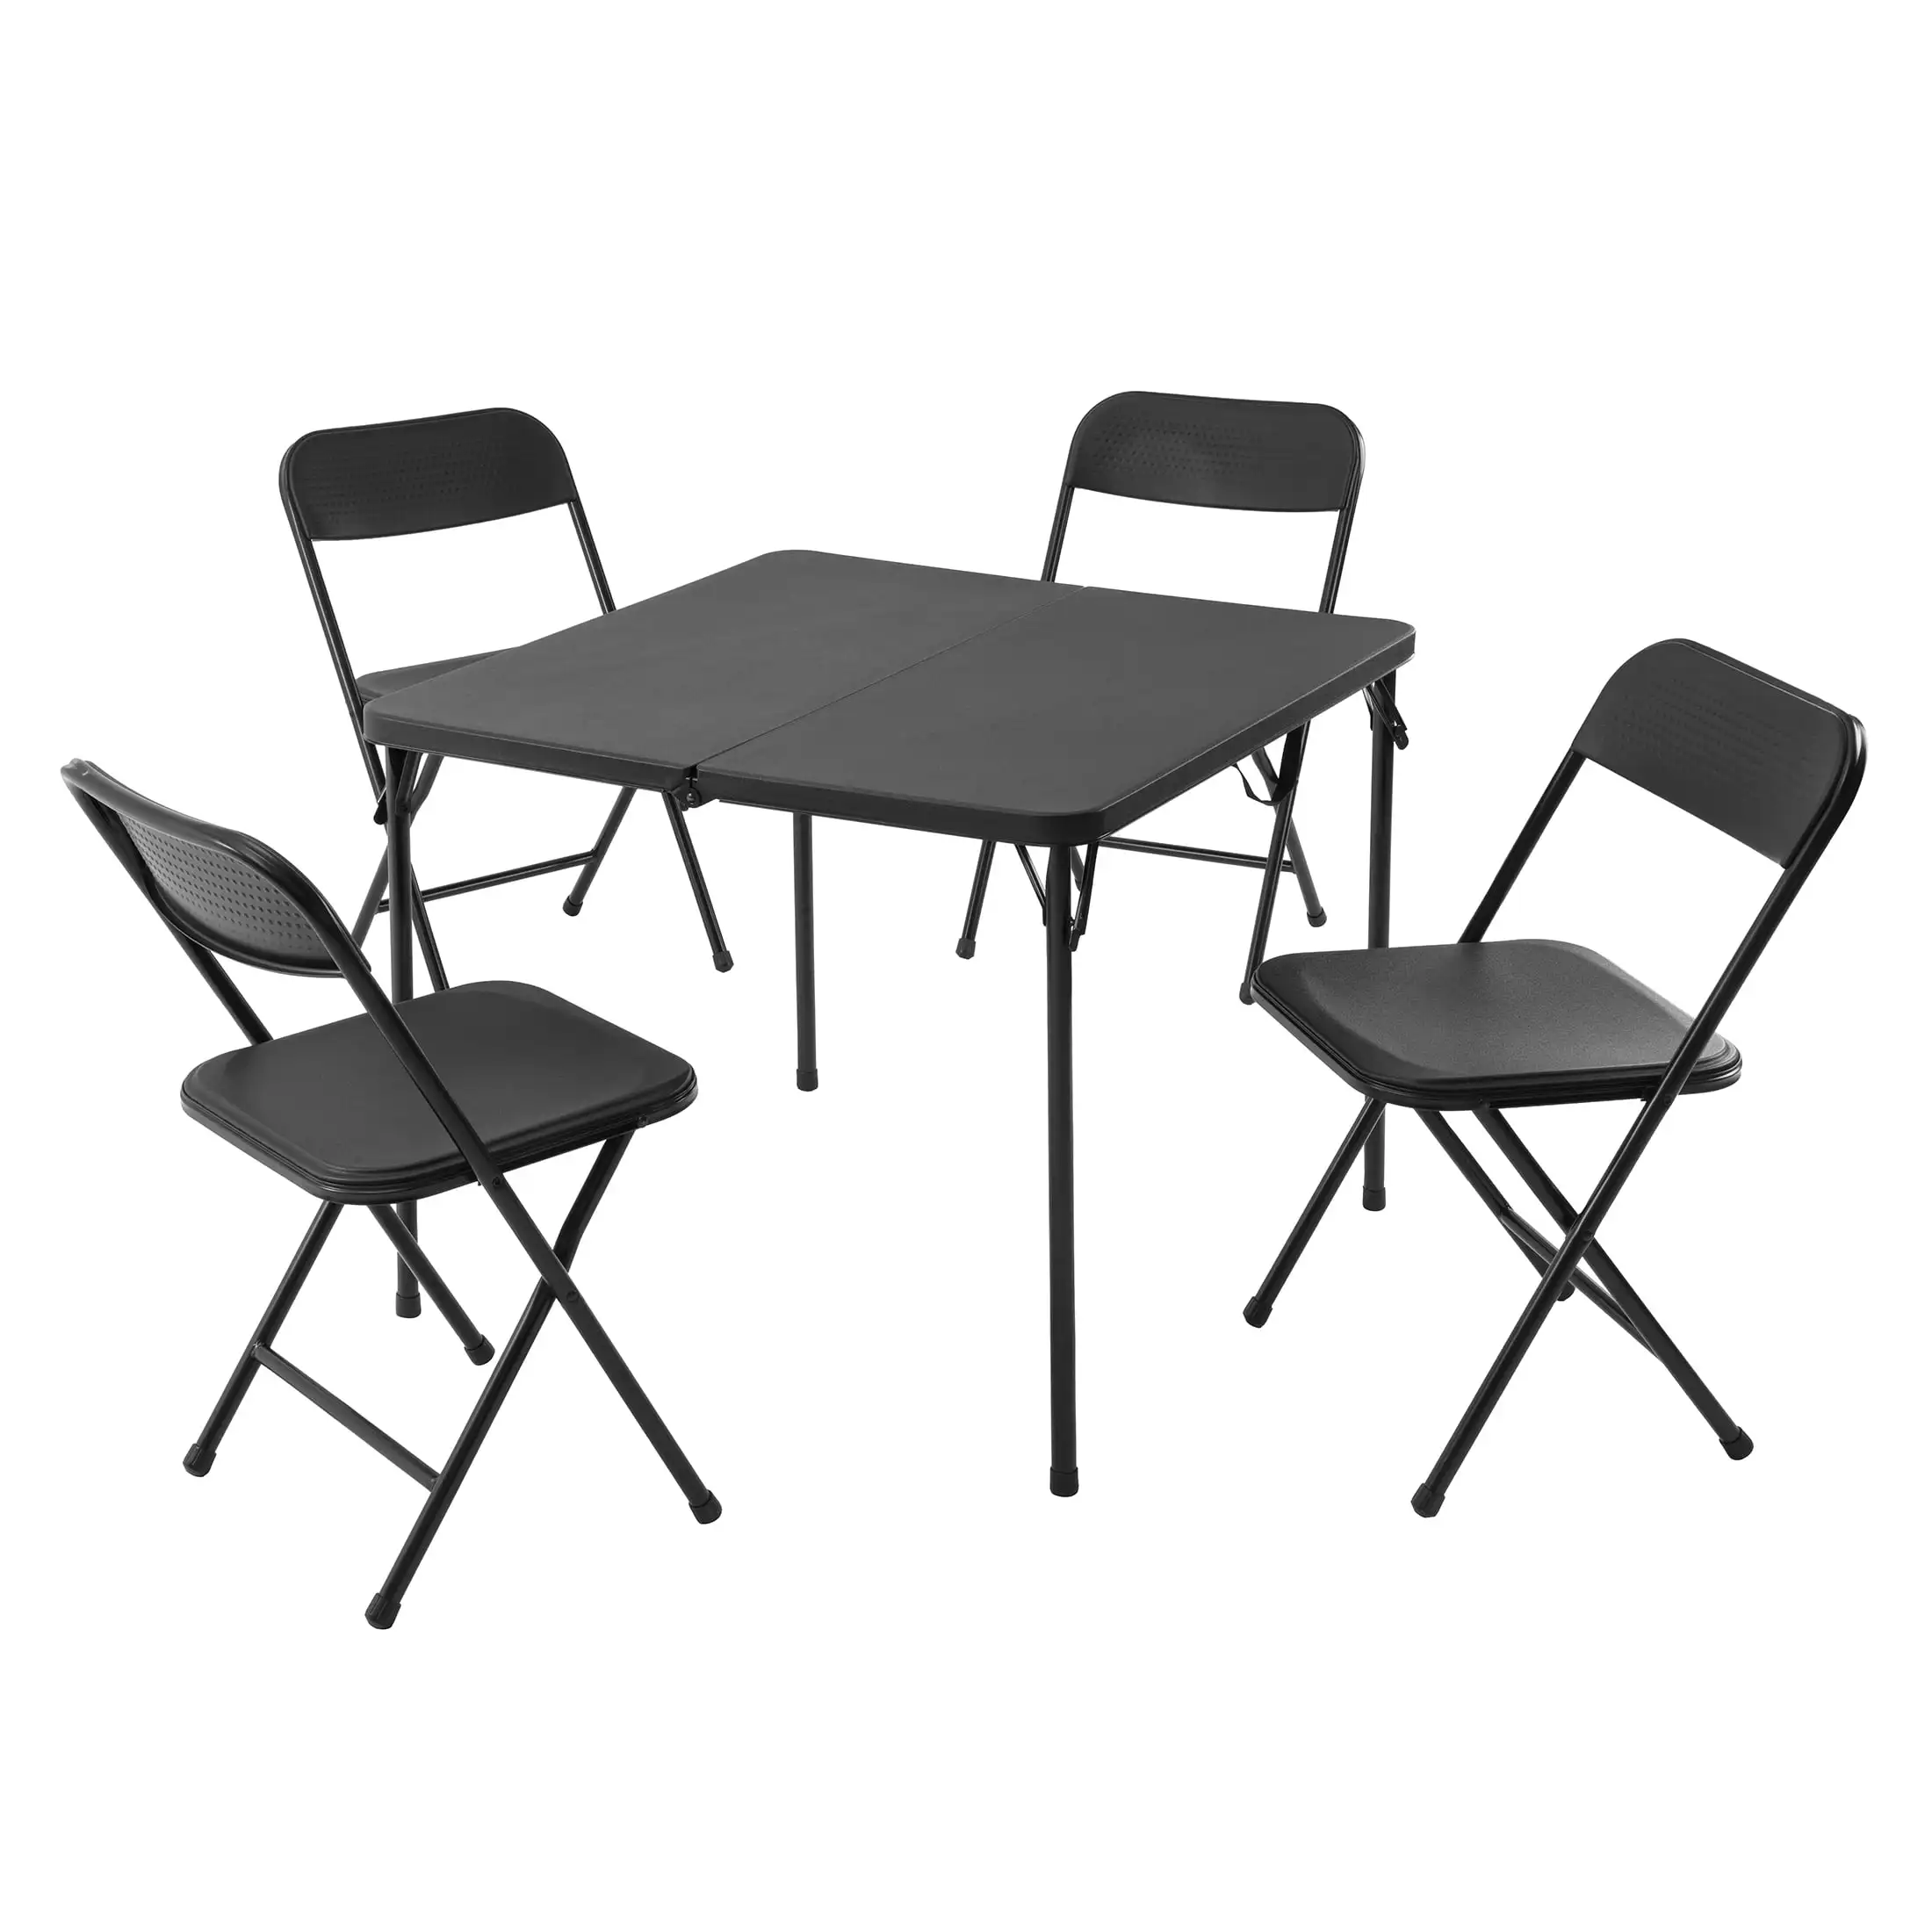 Mainstays 5 Piece Resin Card Table and Four Chairs Set Black Table: 34